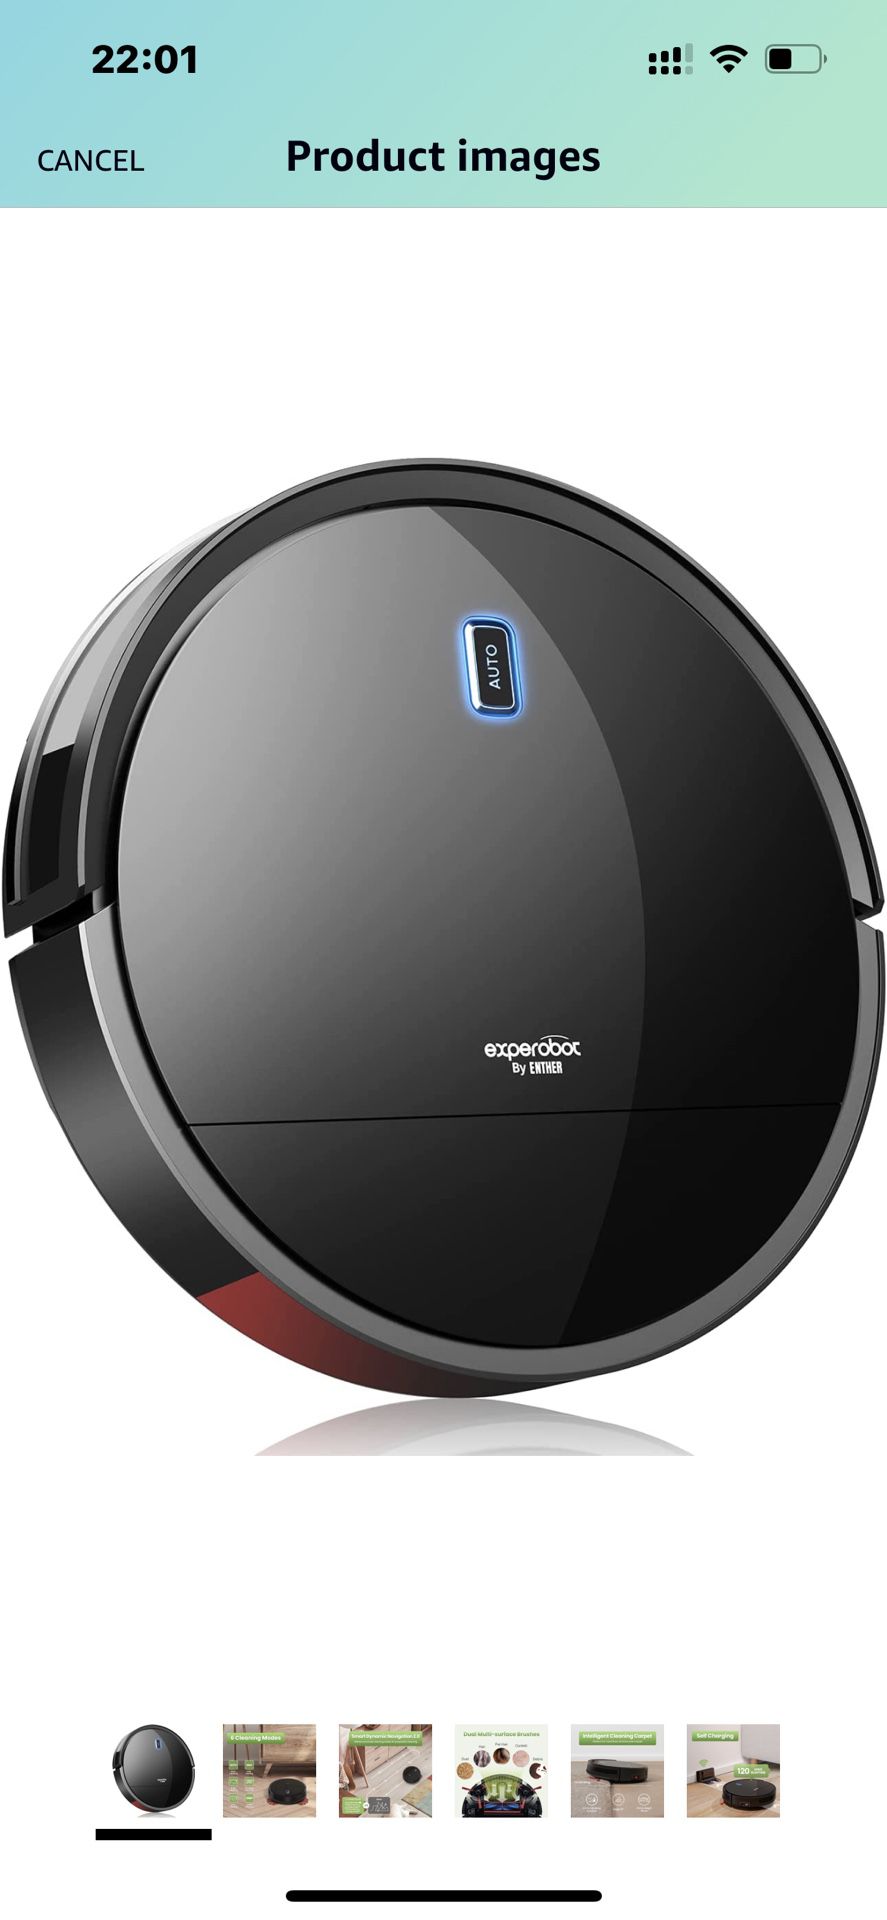 Enther Robot Vacuum Cleaner, Robotic Vacuum Cleaner with Gyro Navigation, 2600mAh, 120mins Run Time, Super-Thin, 6 Clean Modes, Self-Charging for Pet 